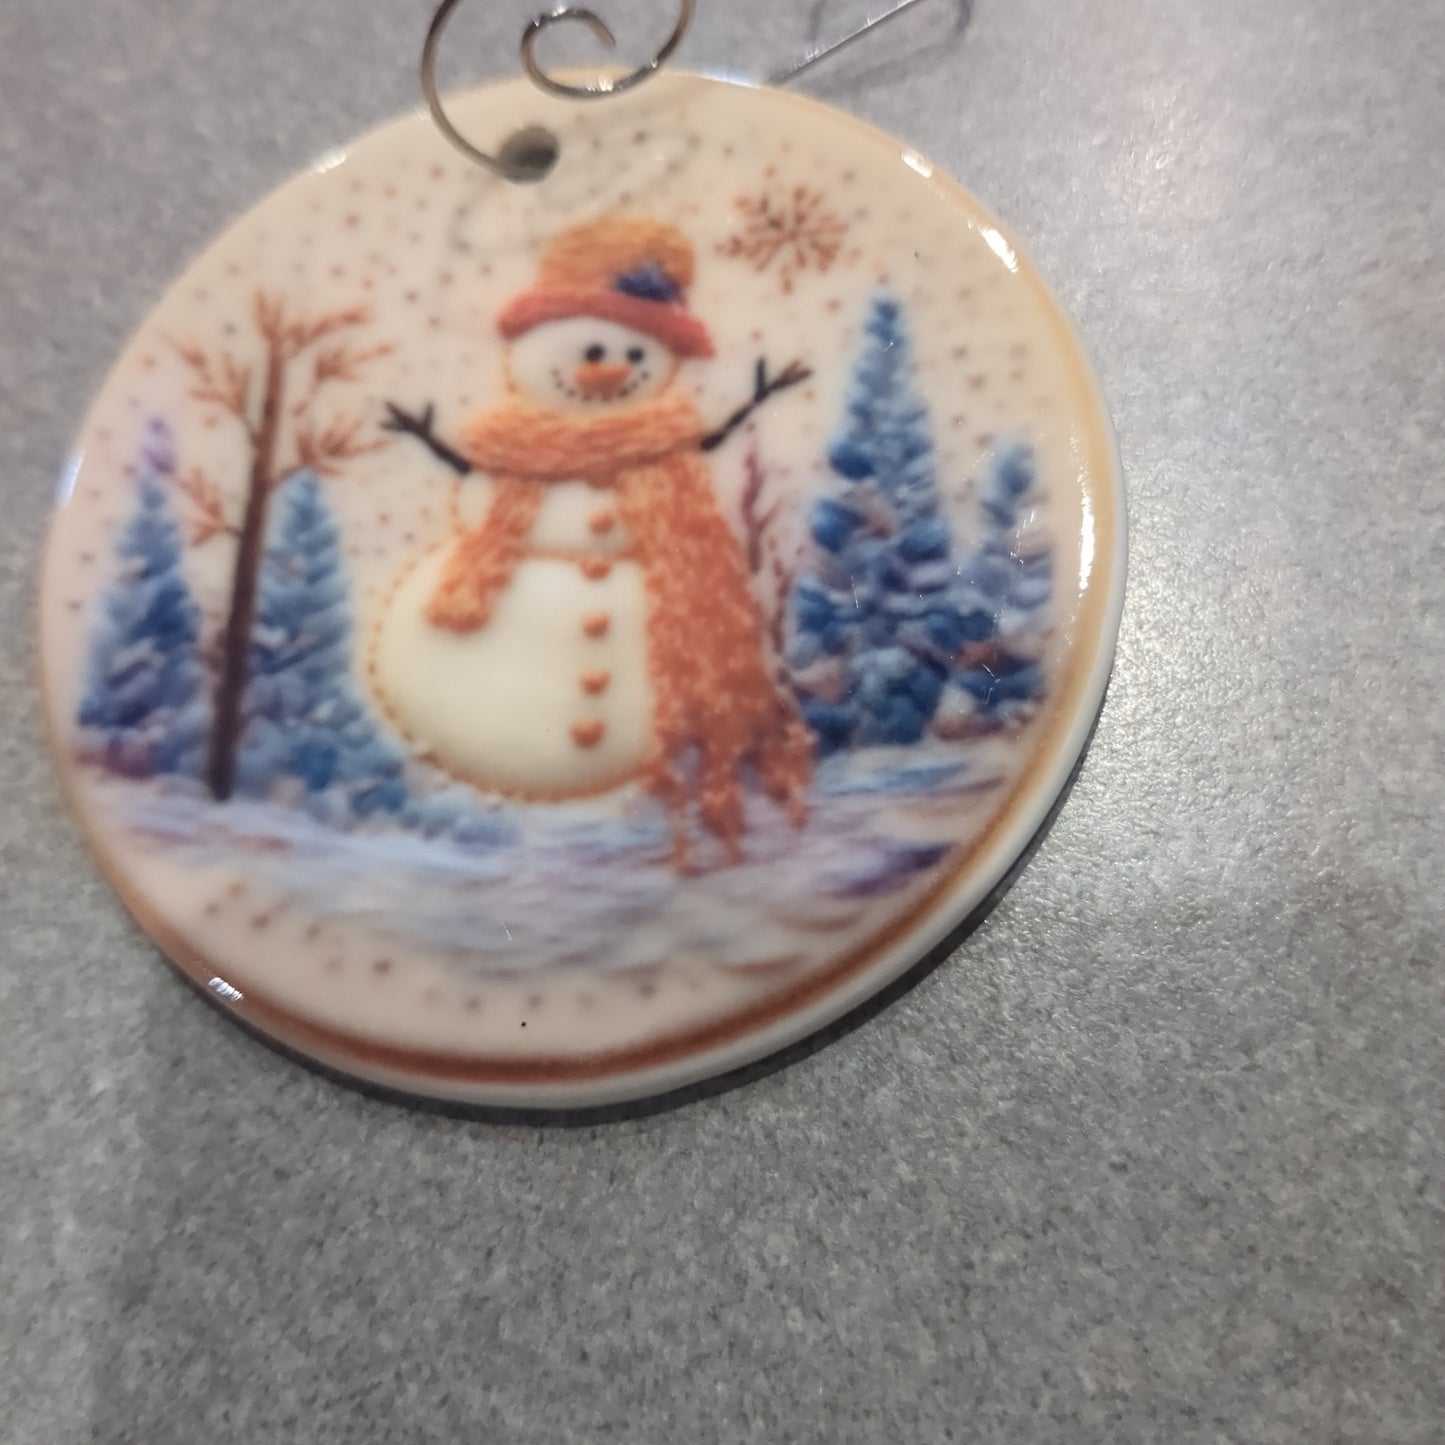 Ceramic ornament snowman with orange hat and and orange scarf